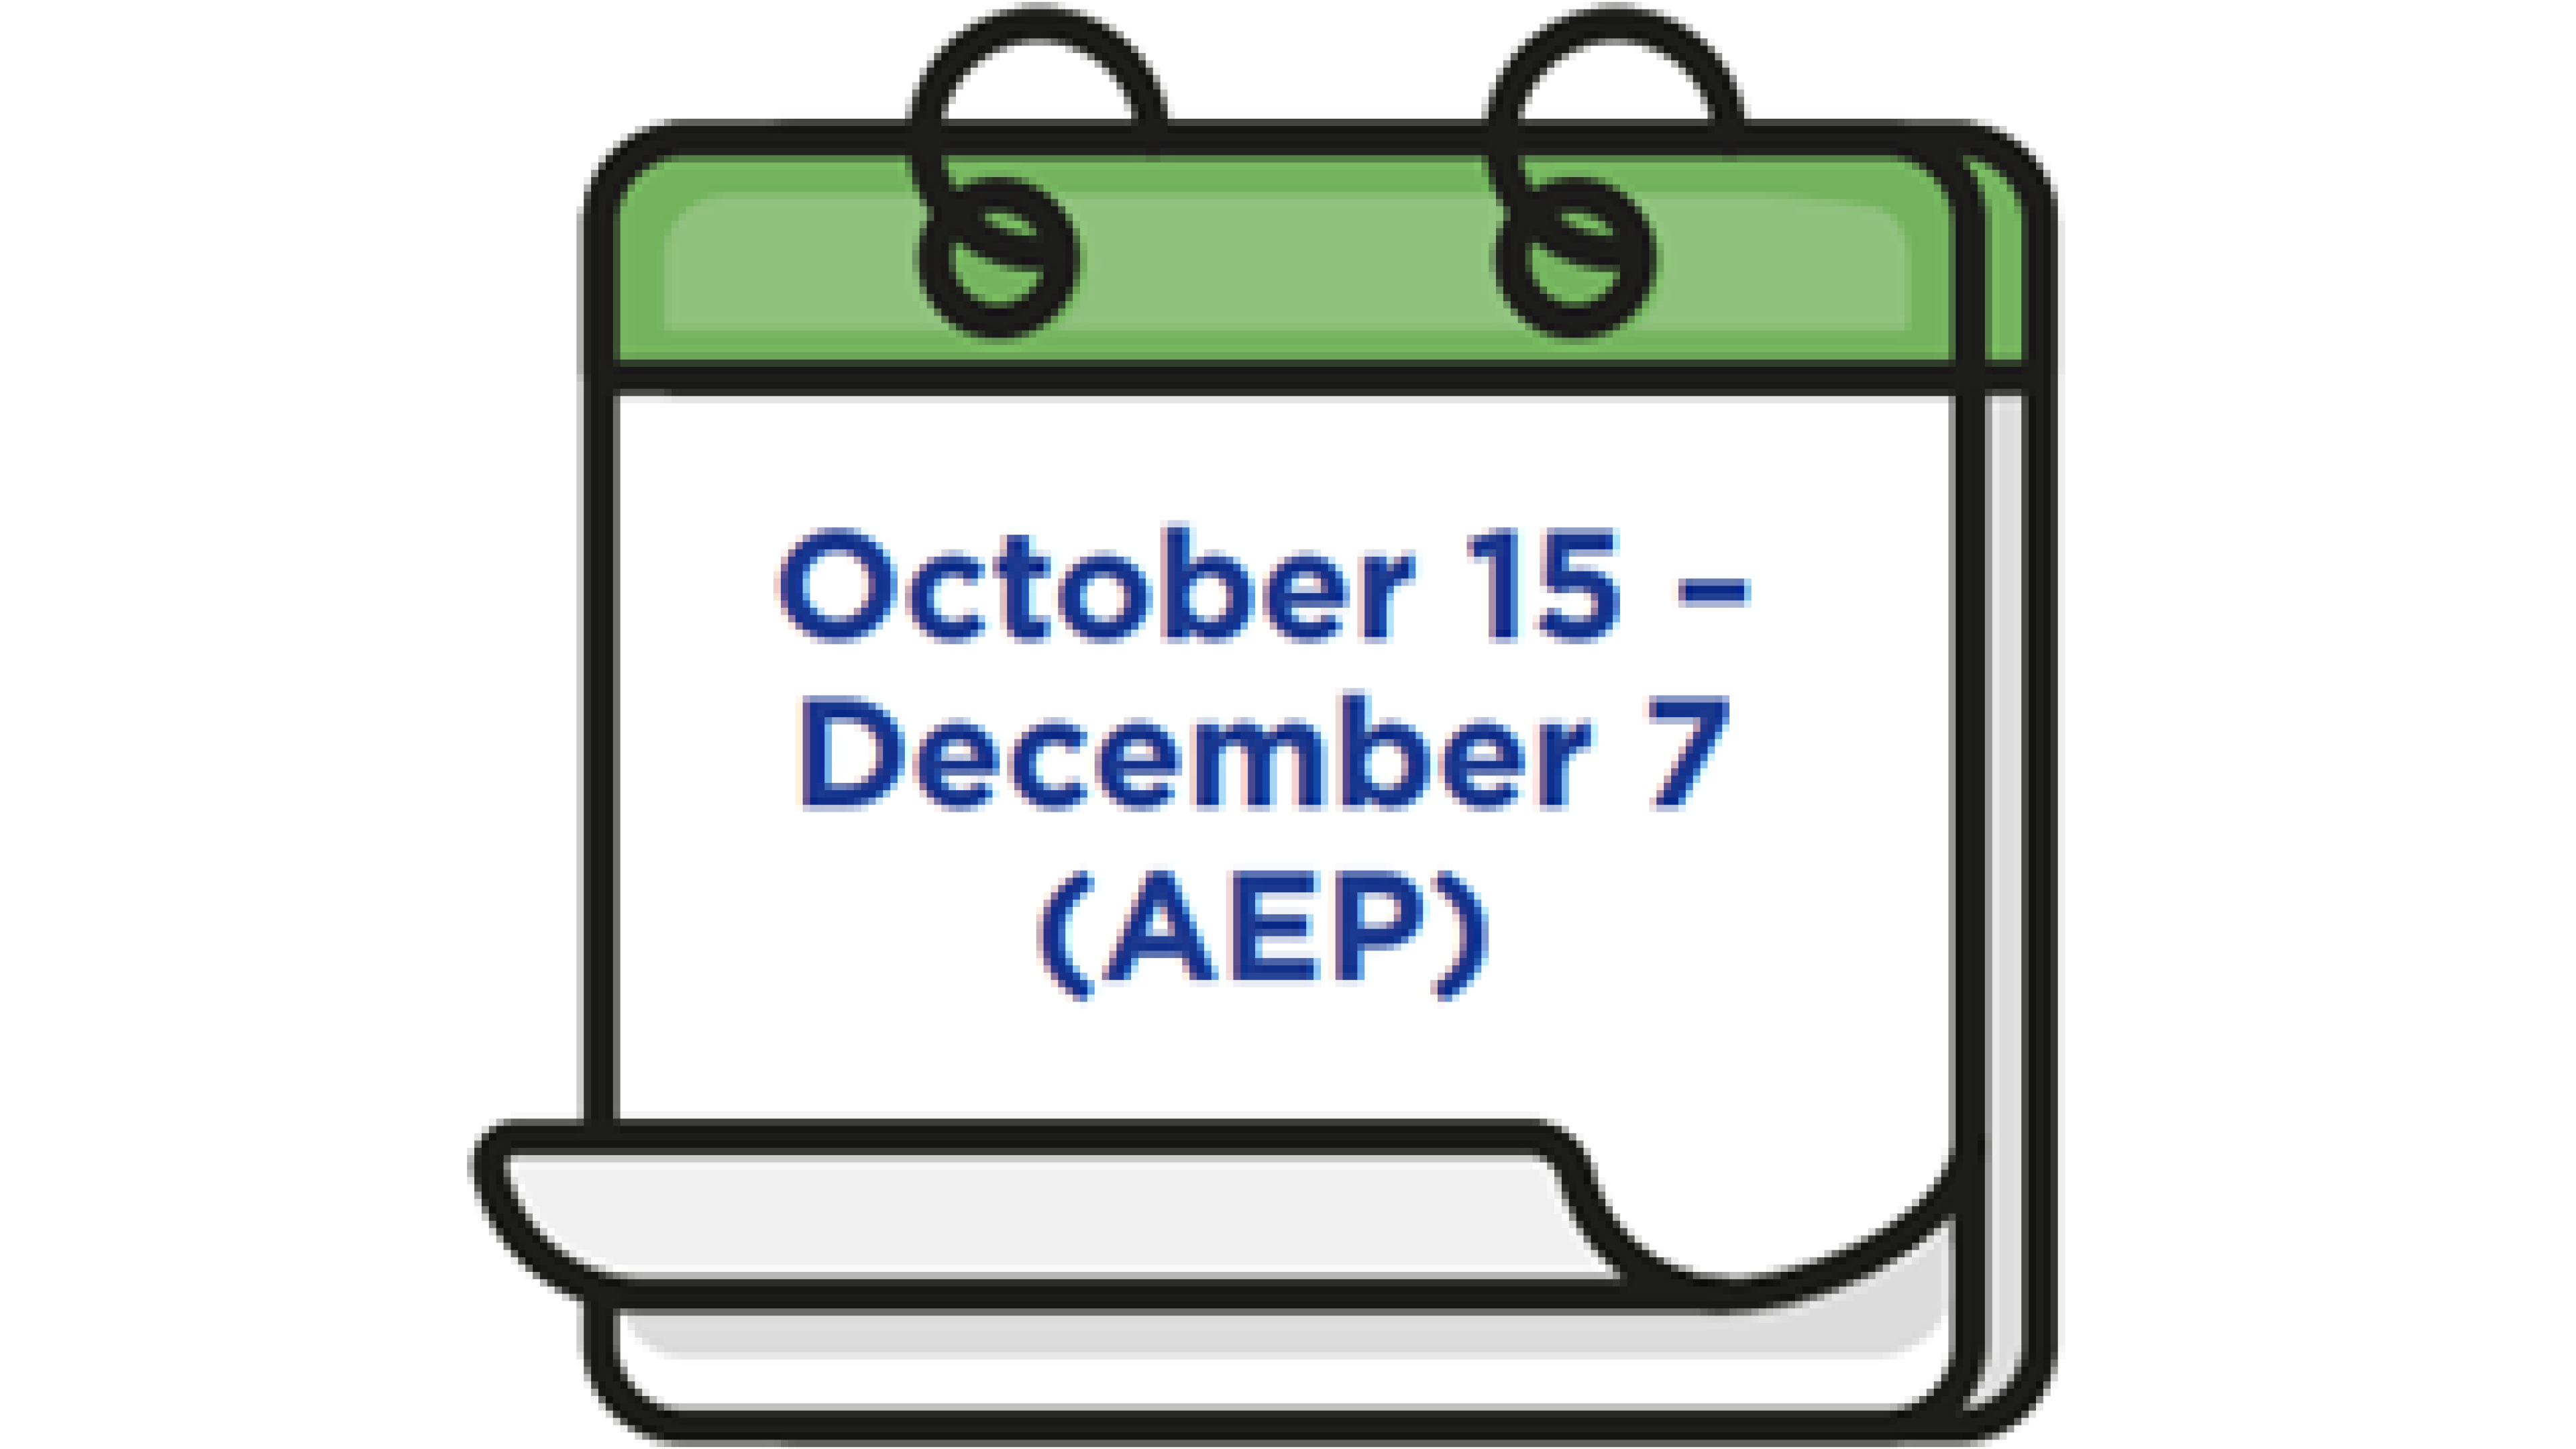 A calendar is shown with the text October 15 - December7 (AEP).